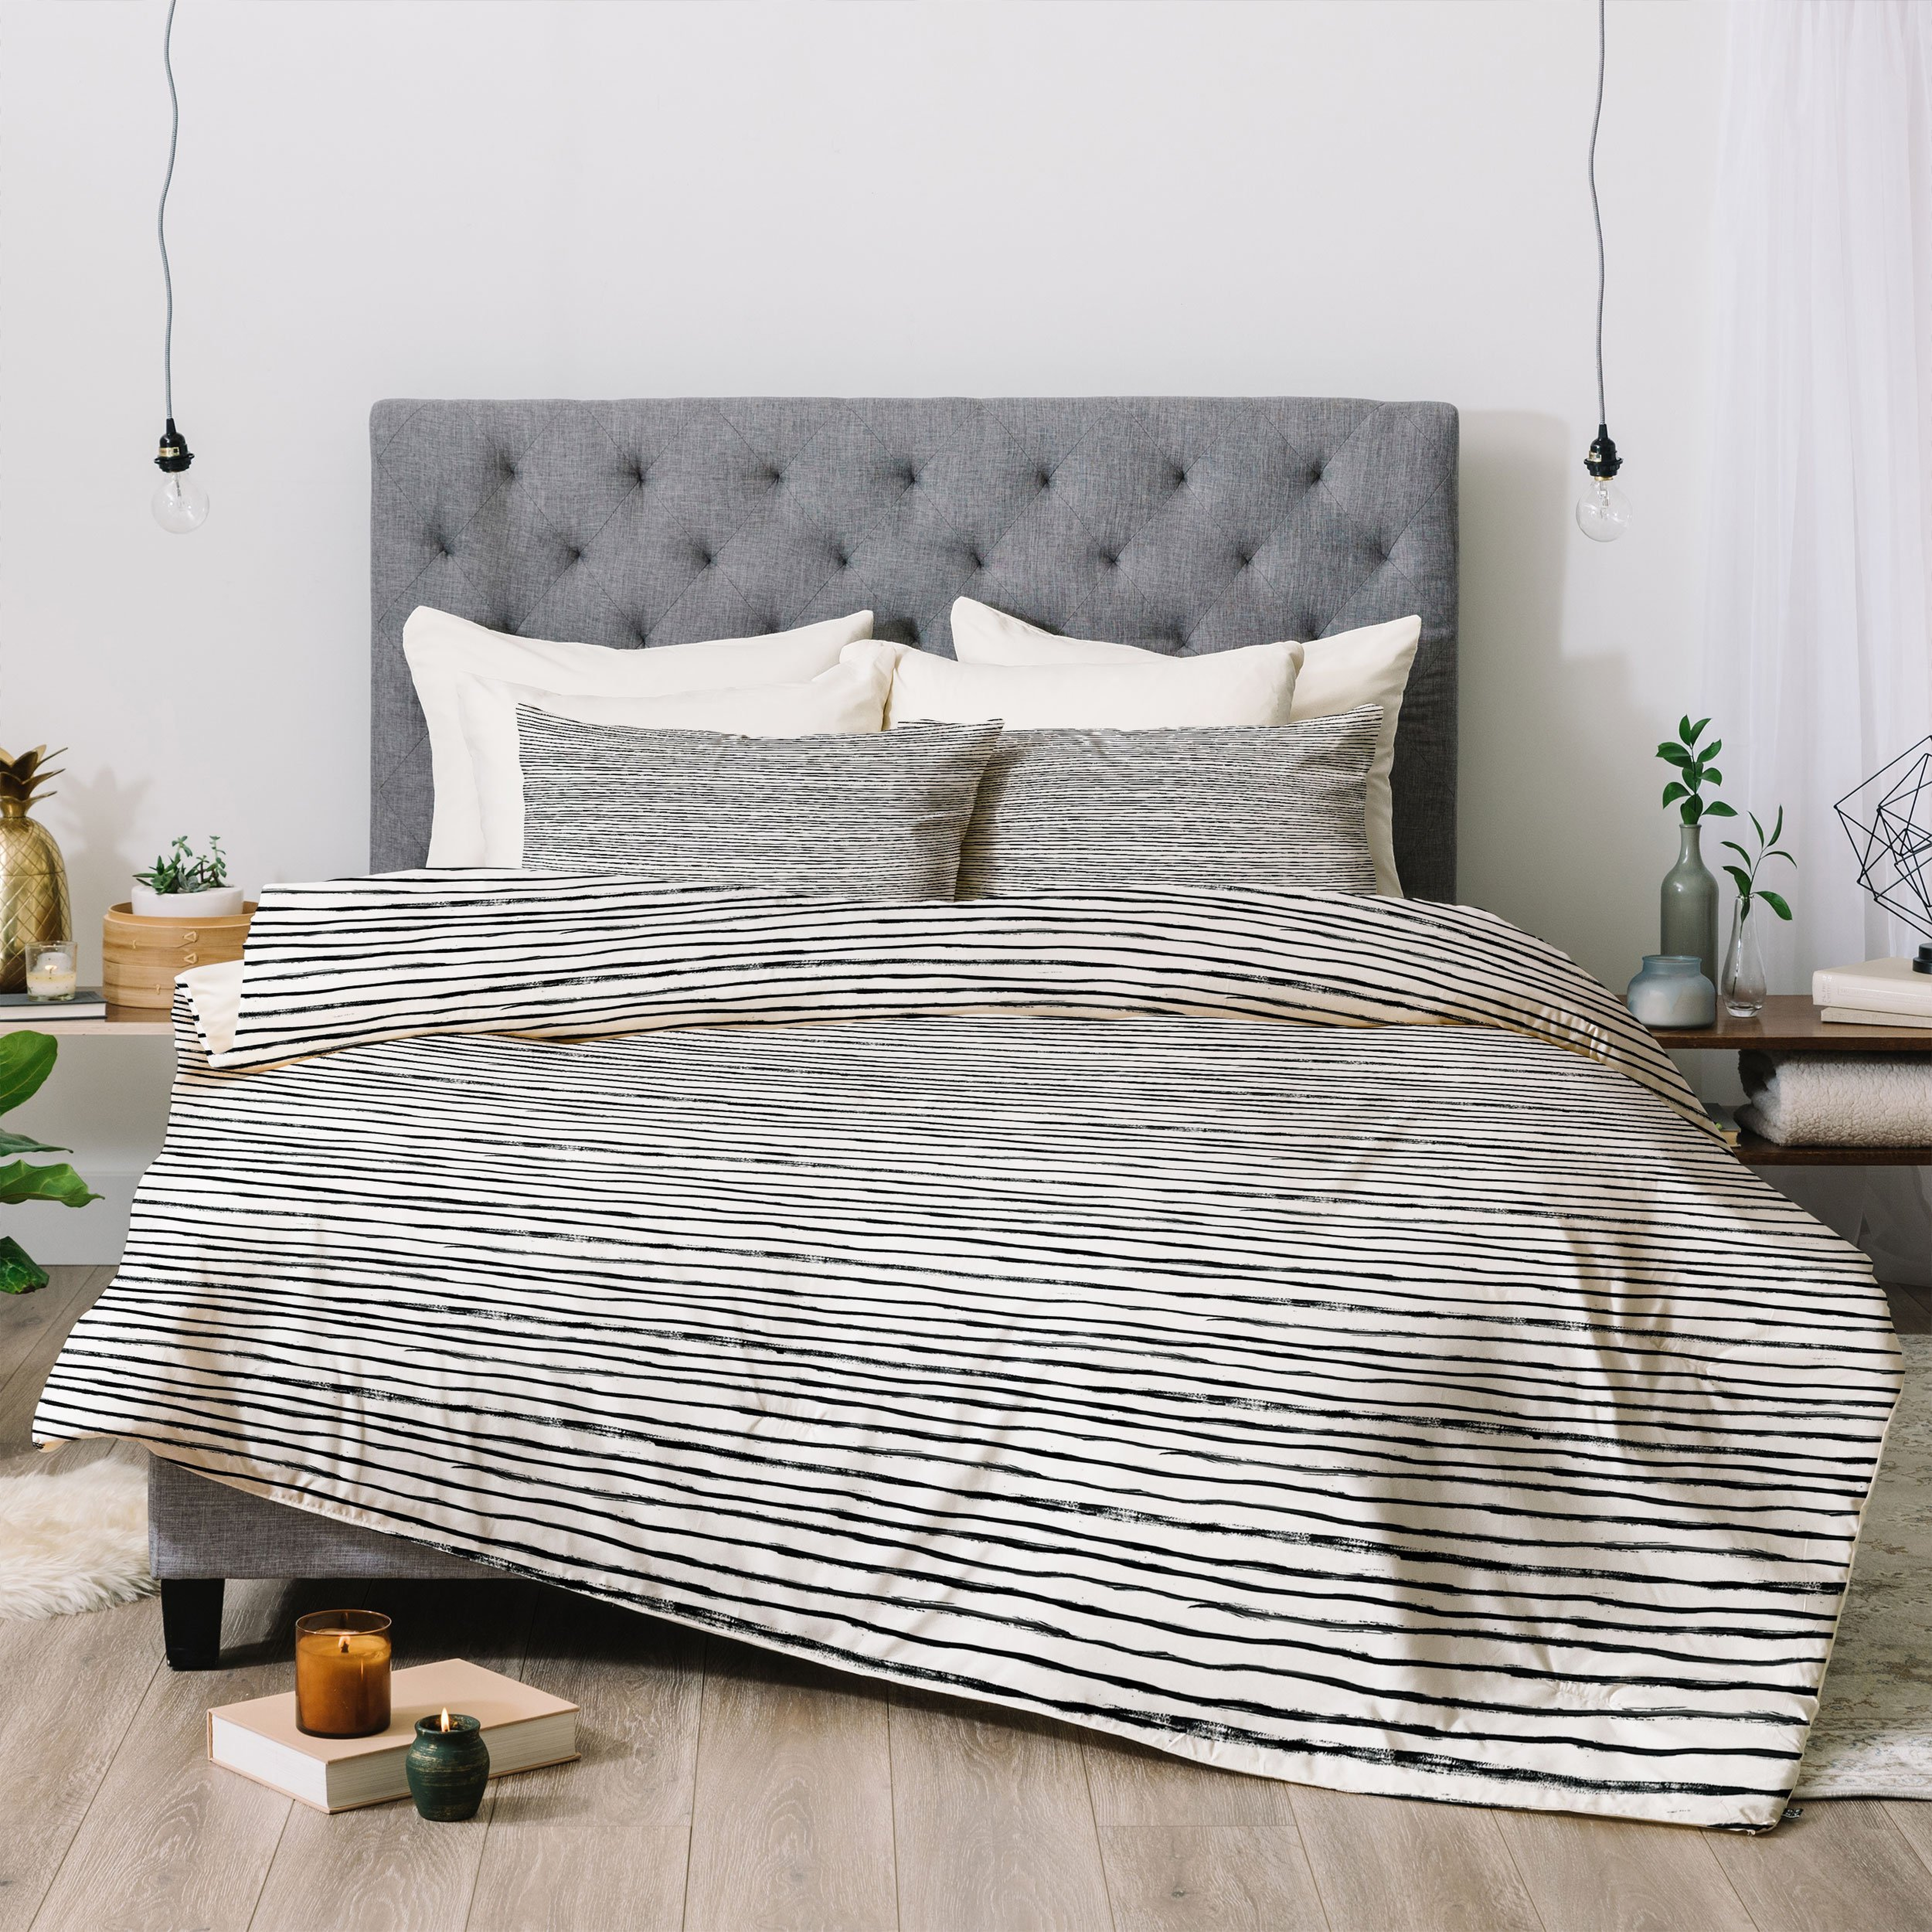 Dash and Ash Painted Stripes Comforter - Full/Queen / Comforter + Pillow Sham(s) - Wander Print Co.